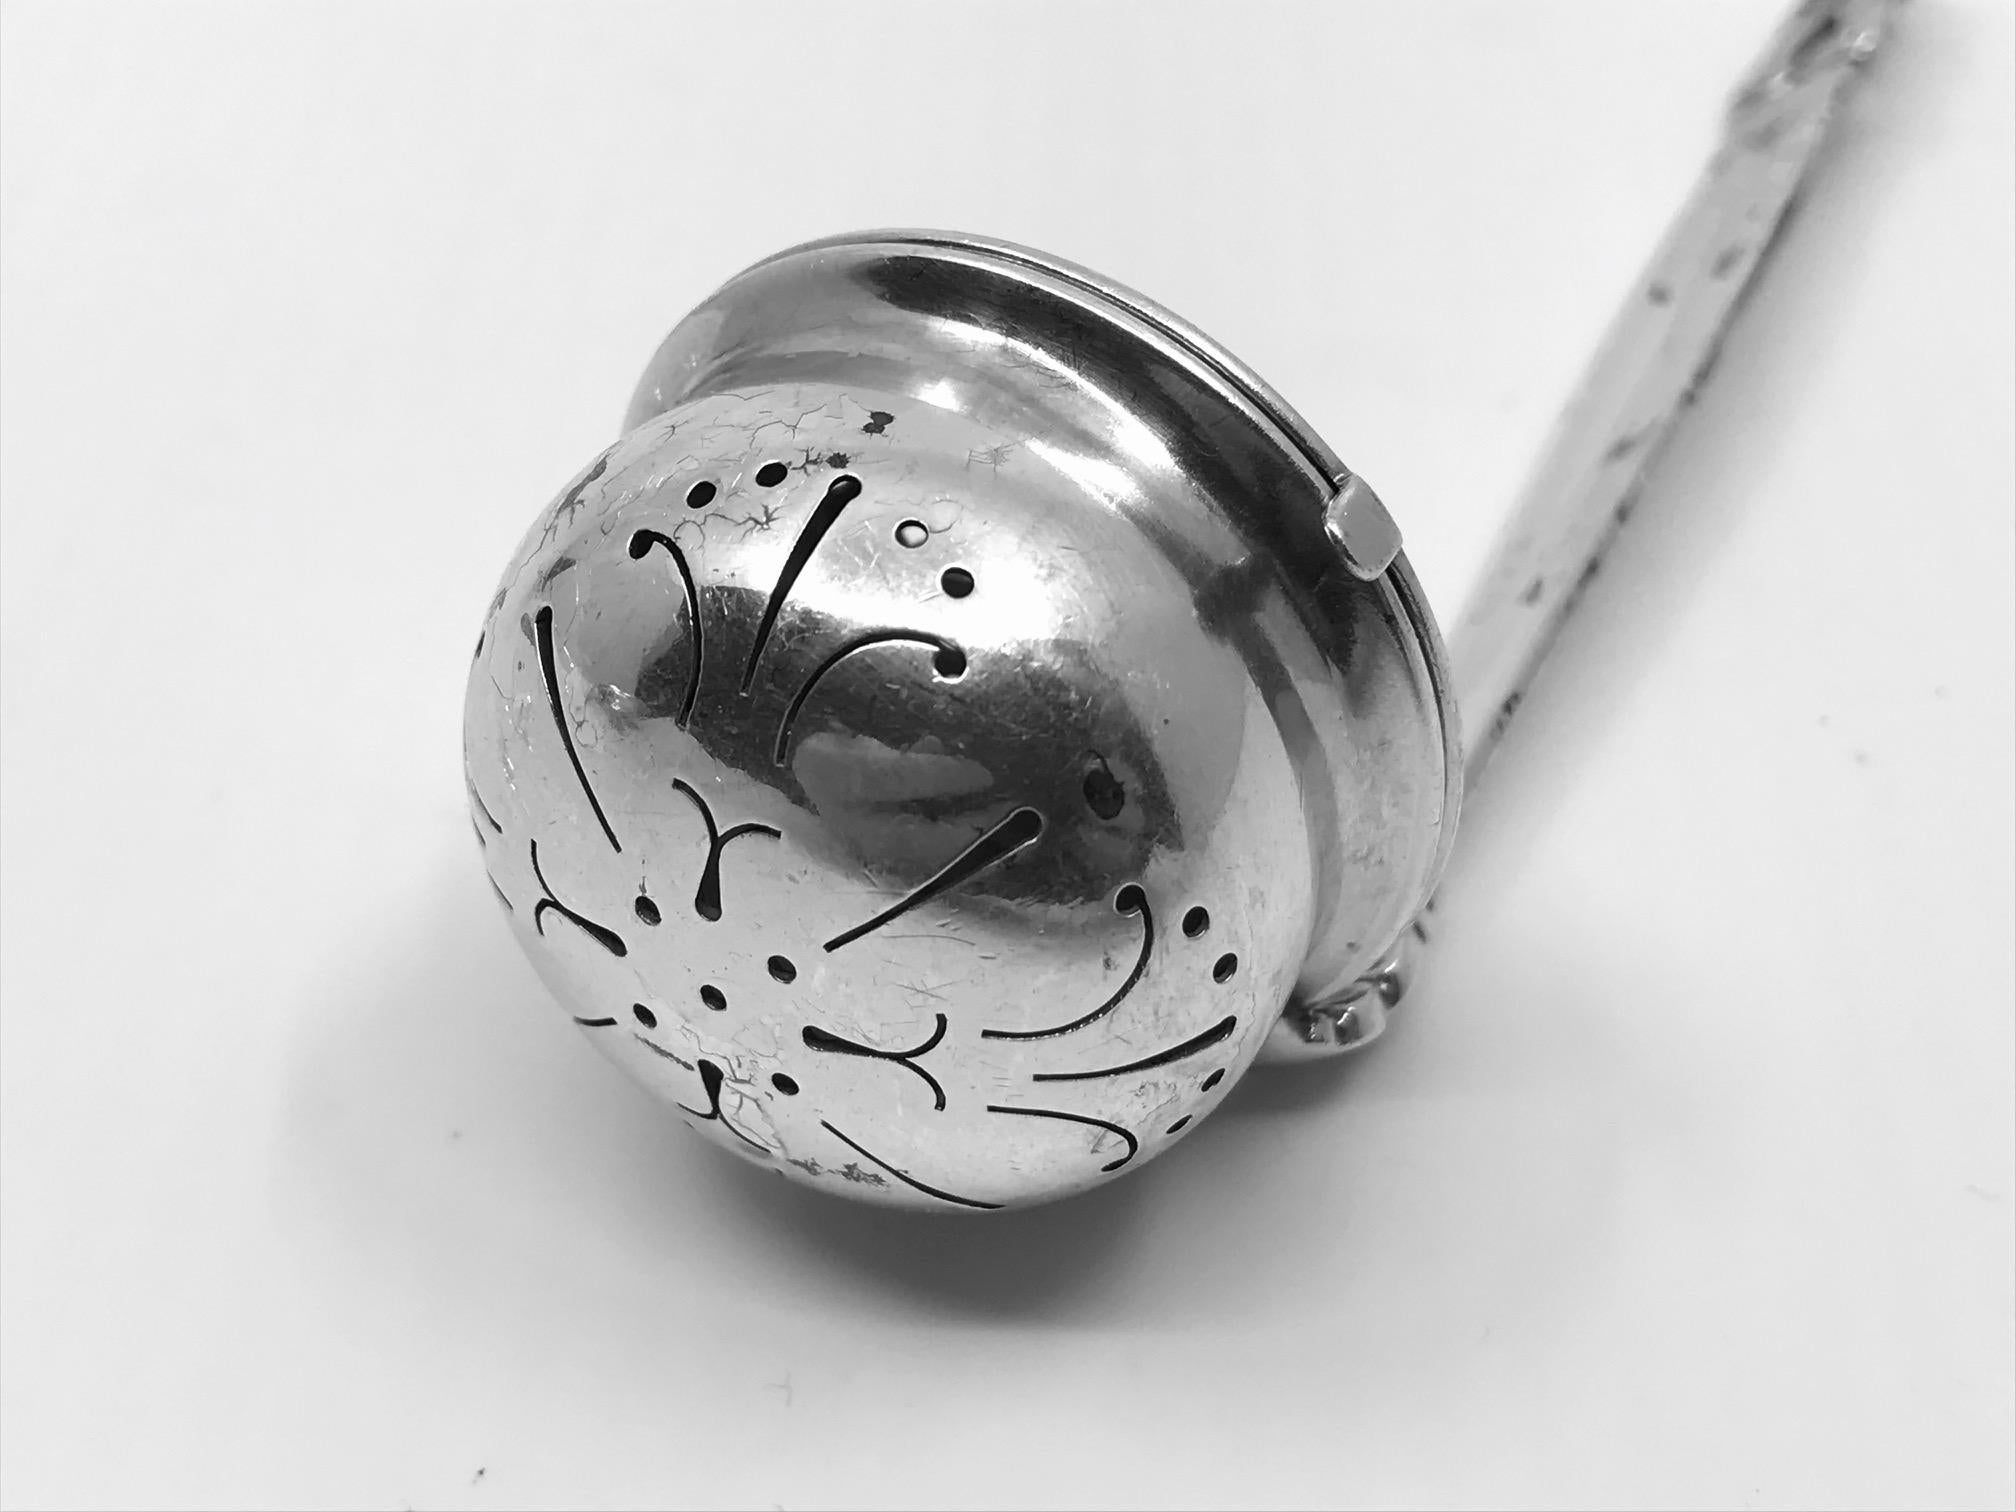 A Danish Georg Jensen tea egg or tea infuser in the iconic Acorn pattern, design #366 by Johan Rohde from 1915. A hard to find and sought after tea egg on handle. A meticulously cut out bowl with hinged lid attached to a handle.

Additional